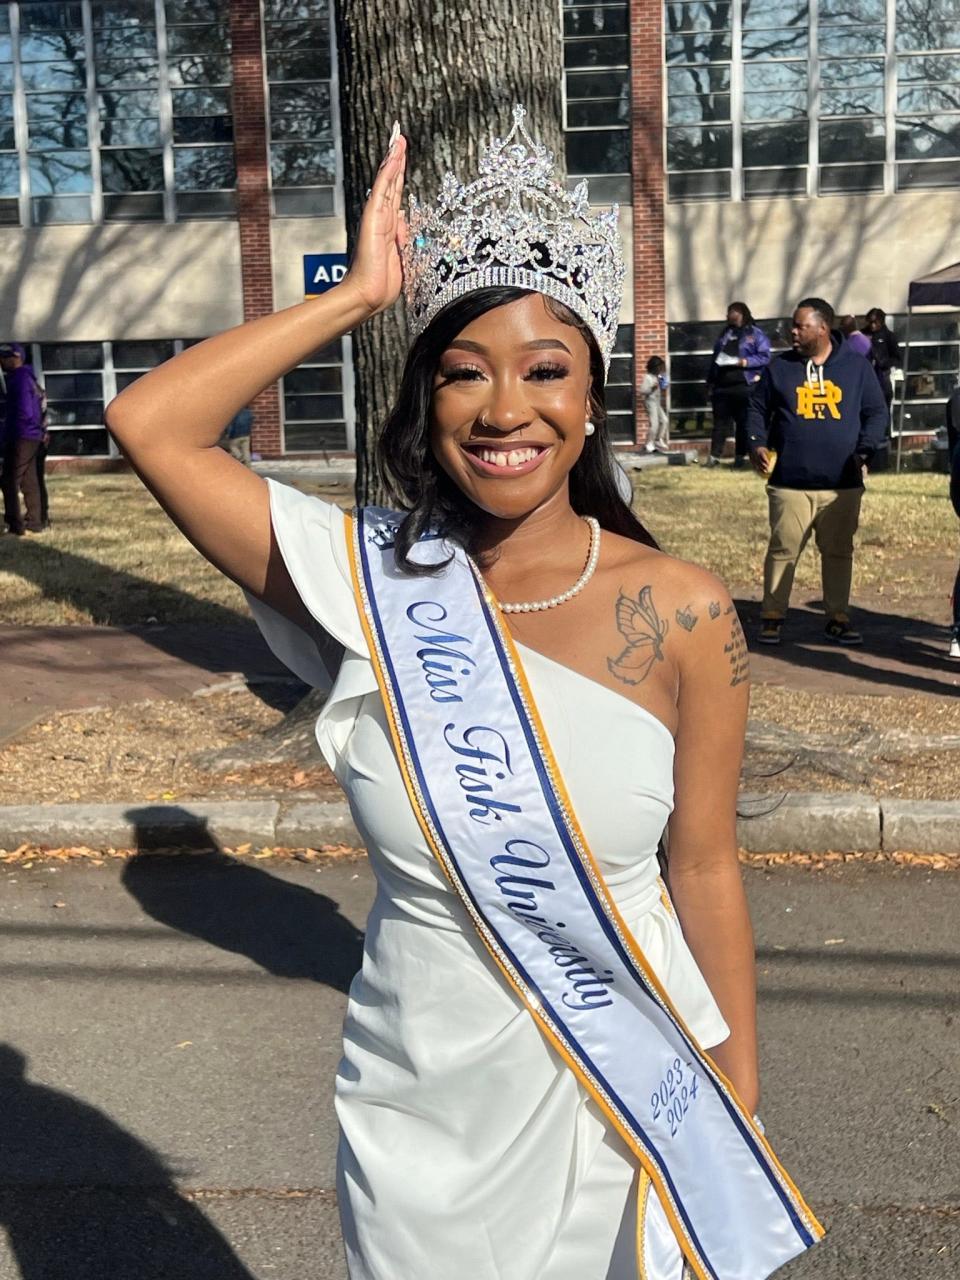 Aaliyah Tyon Riddle, Miss Fisk University, is a graduate of Austin East Magnet High School in Knoxville. She'll be at Friday's benefit concert at the Historic Grove Theatre/High Places Community Church in Grove Center